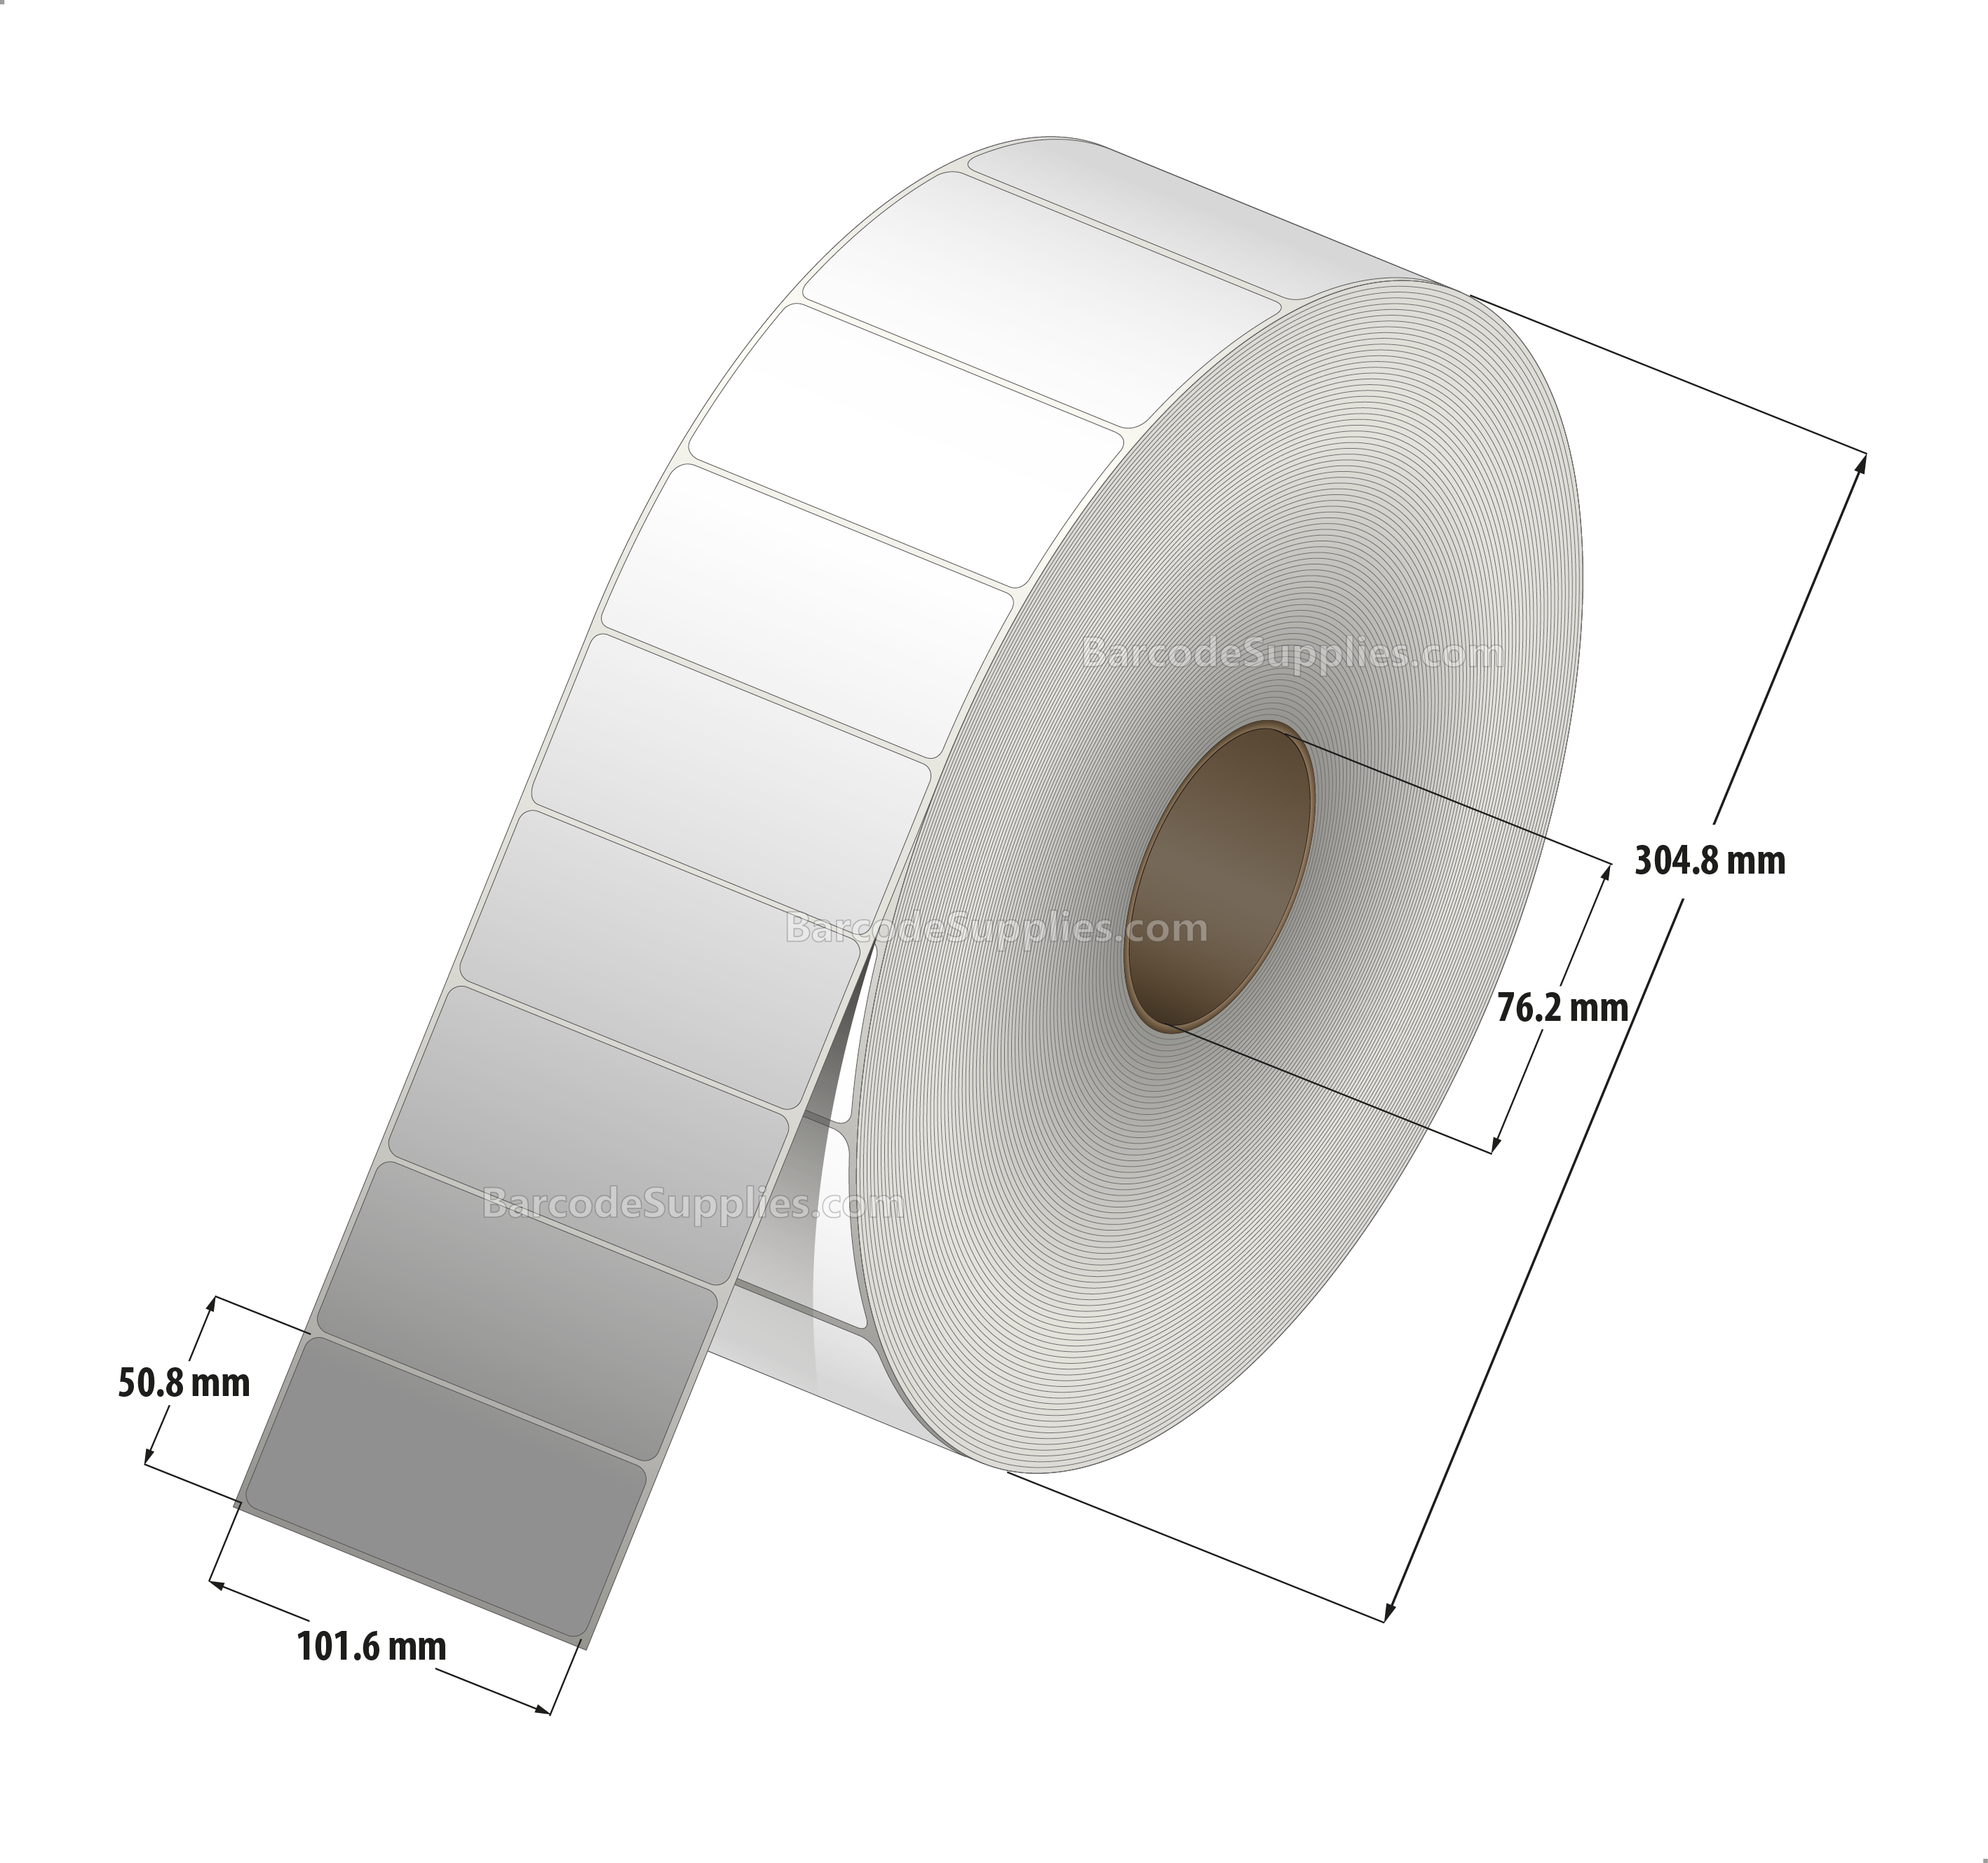 4 x 2 Thermal Transfer White Labels With Permanent Adhesive - No Perforation - 7595 Labels Per Roll - Carton Of 3 Rolls - 22785 Labels Total - MPN: RT-4-2-7595-NP